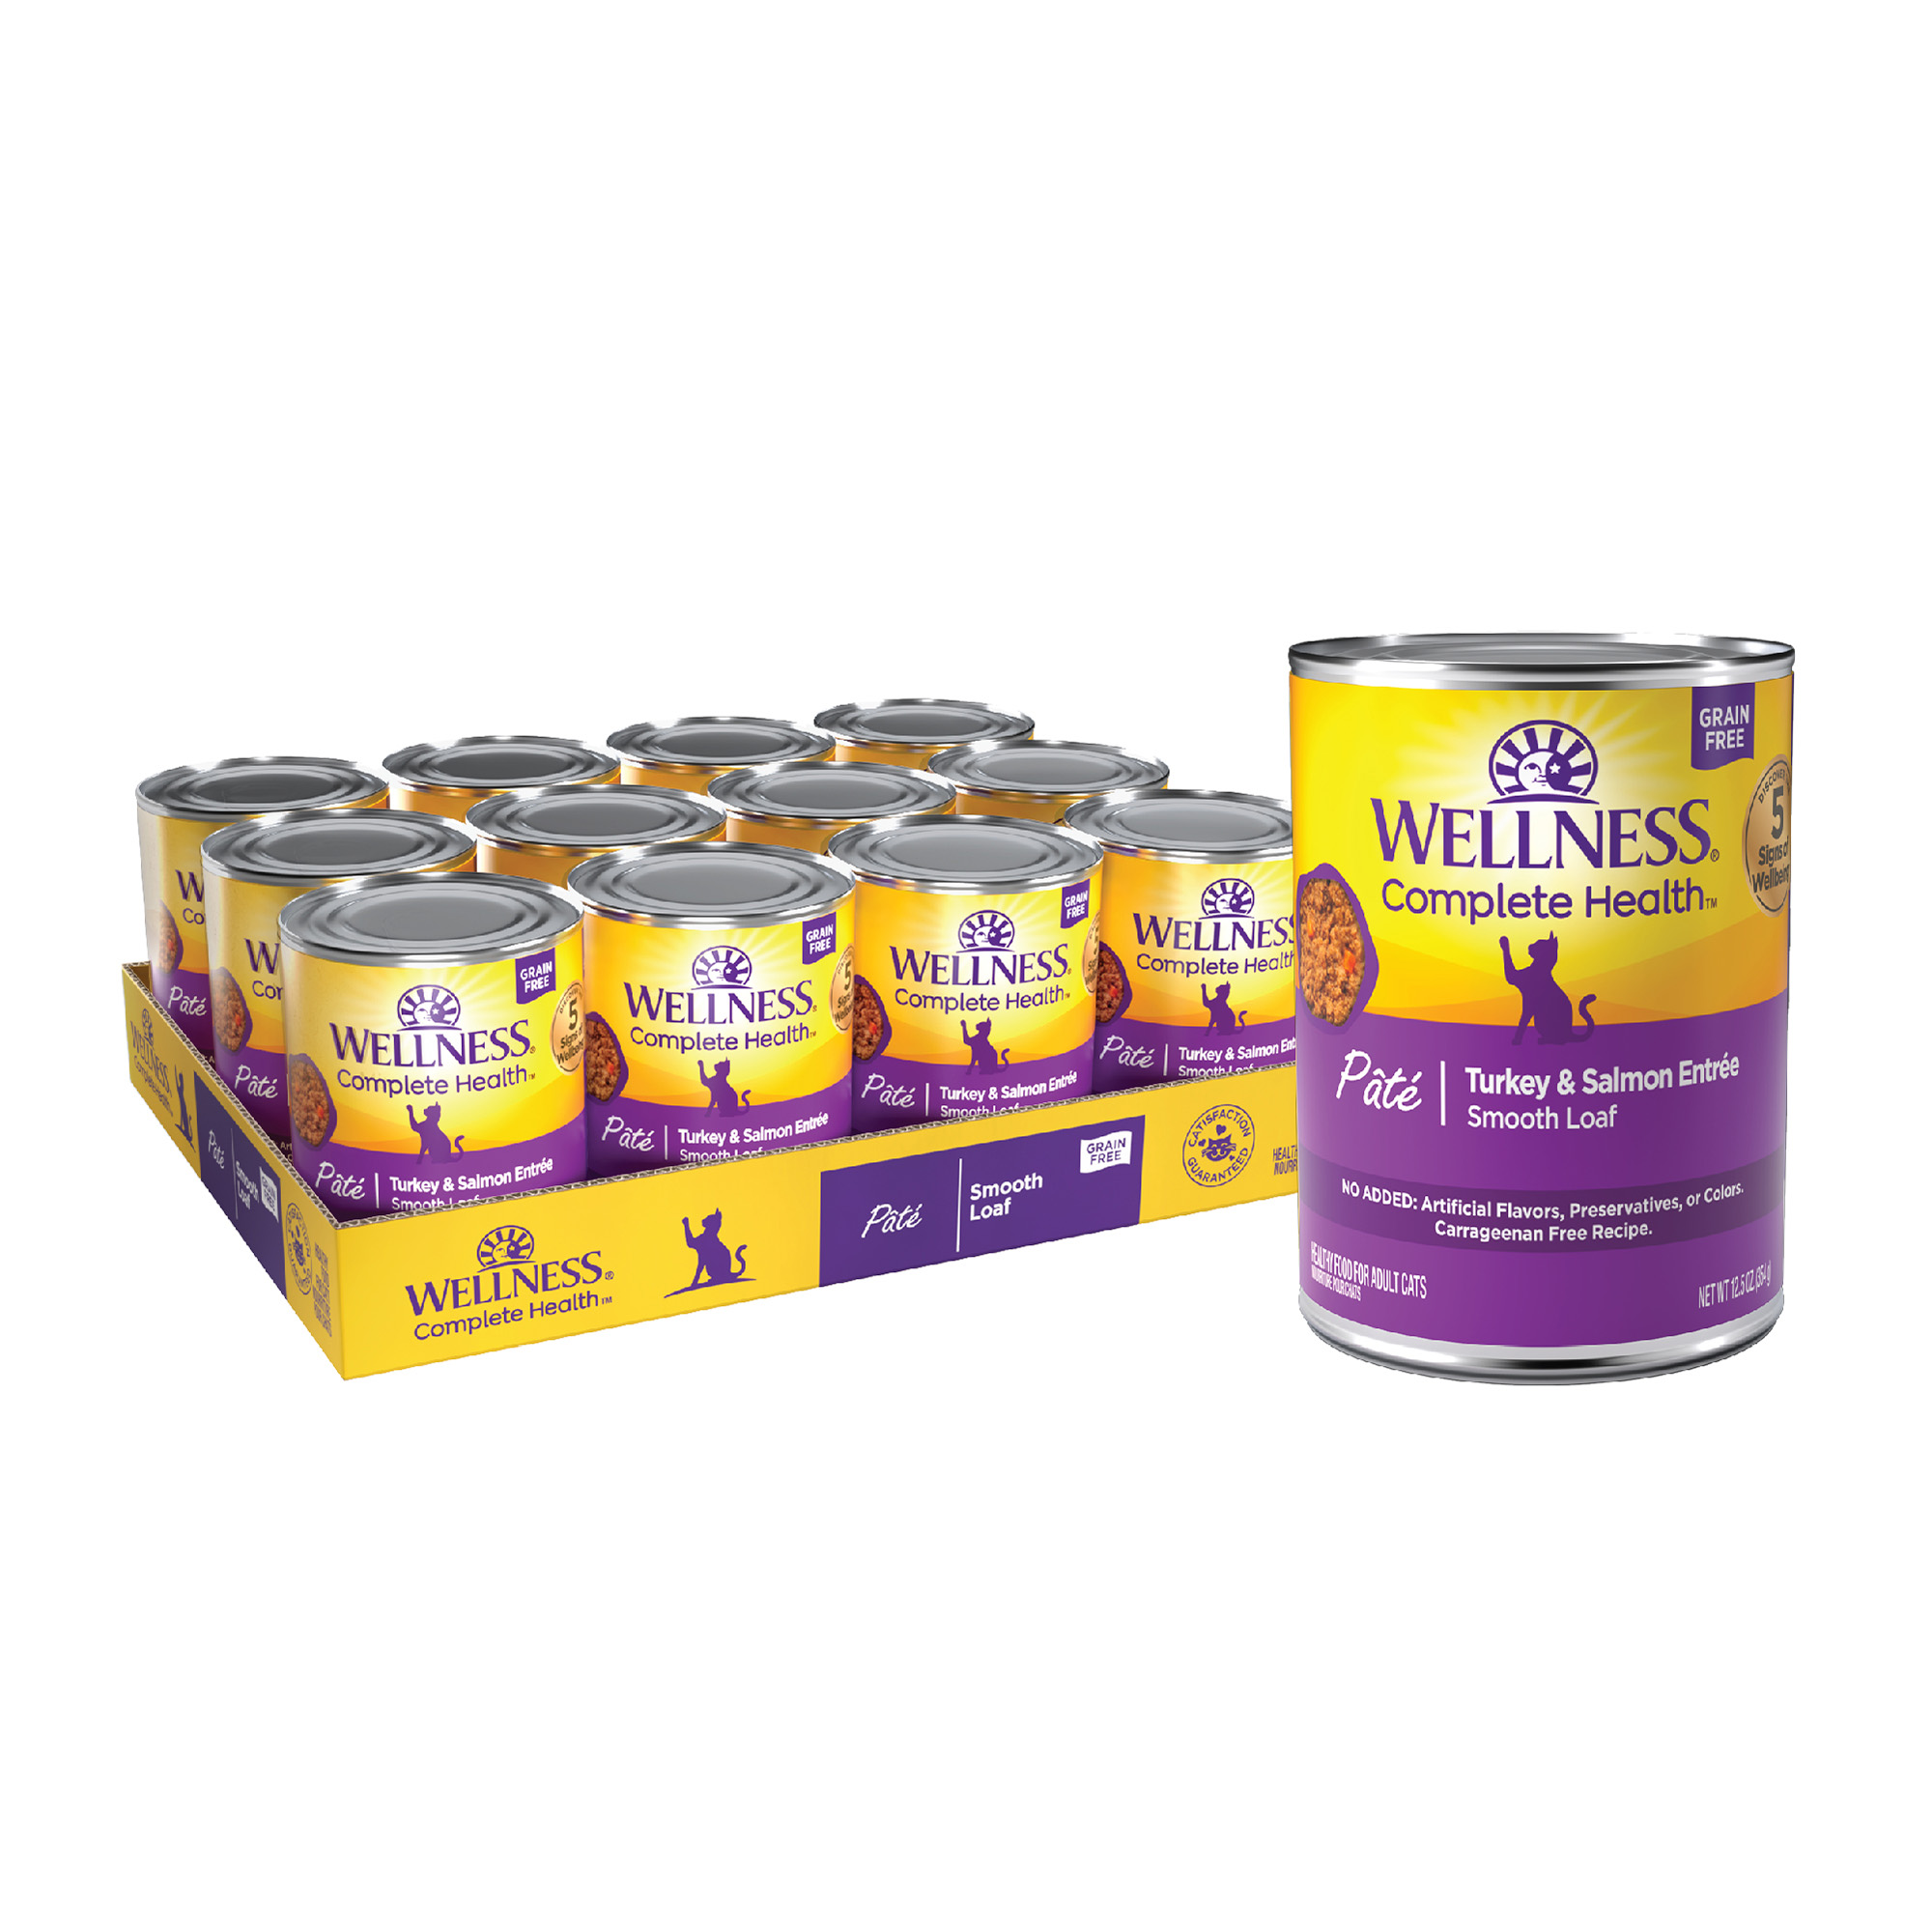 Wellness Complete Health Grain Free Canned Cat Food, Turkey & Salmon Pate, 12.5 Ounces (Pack of 12) - image 1 of 9